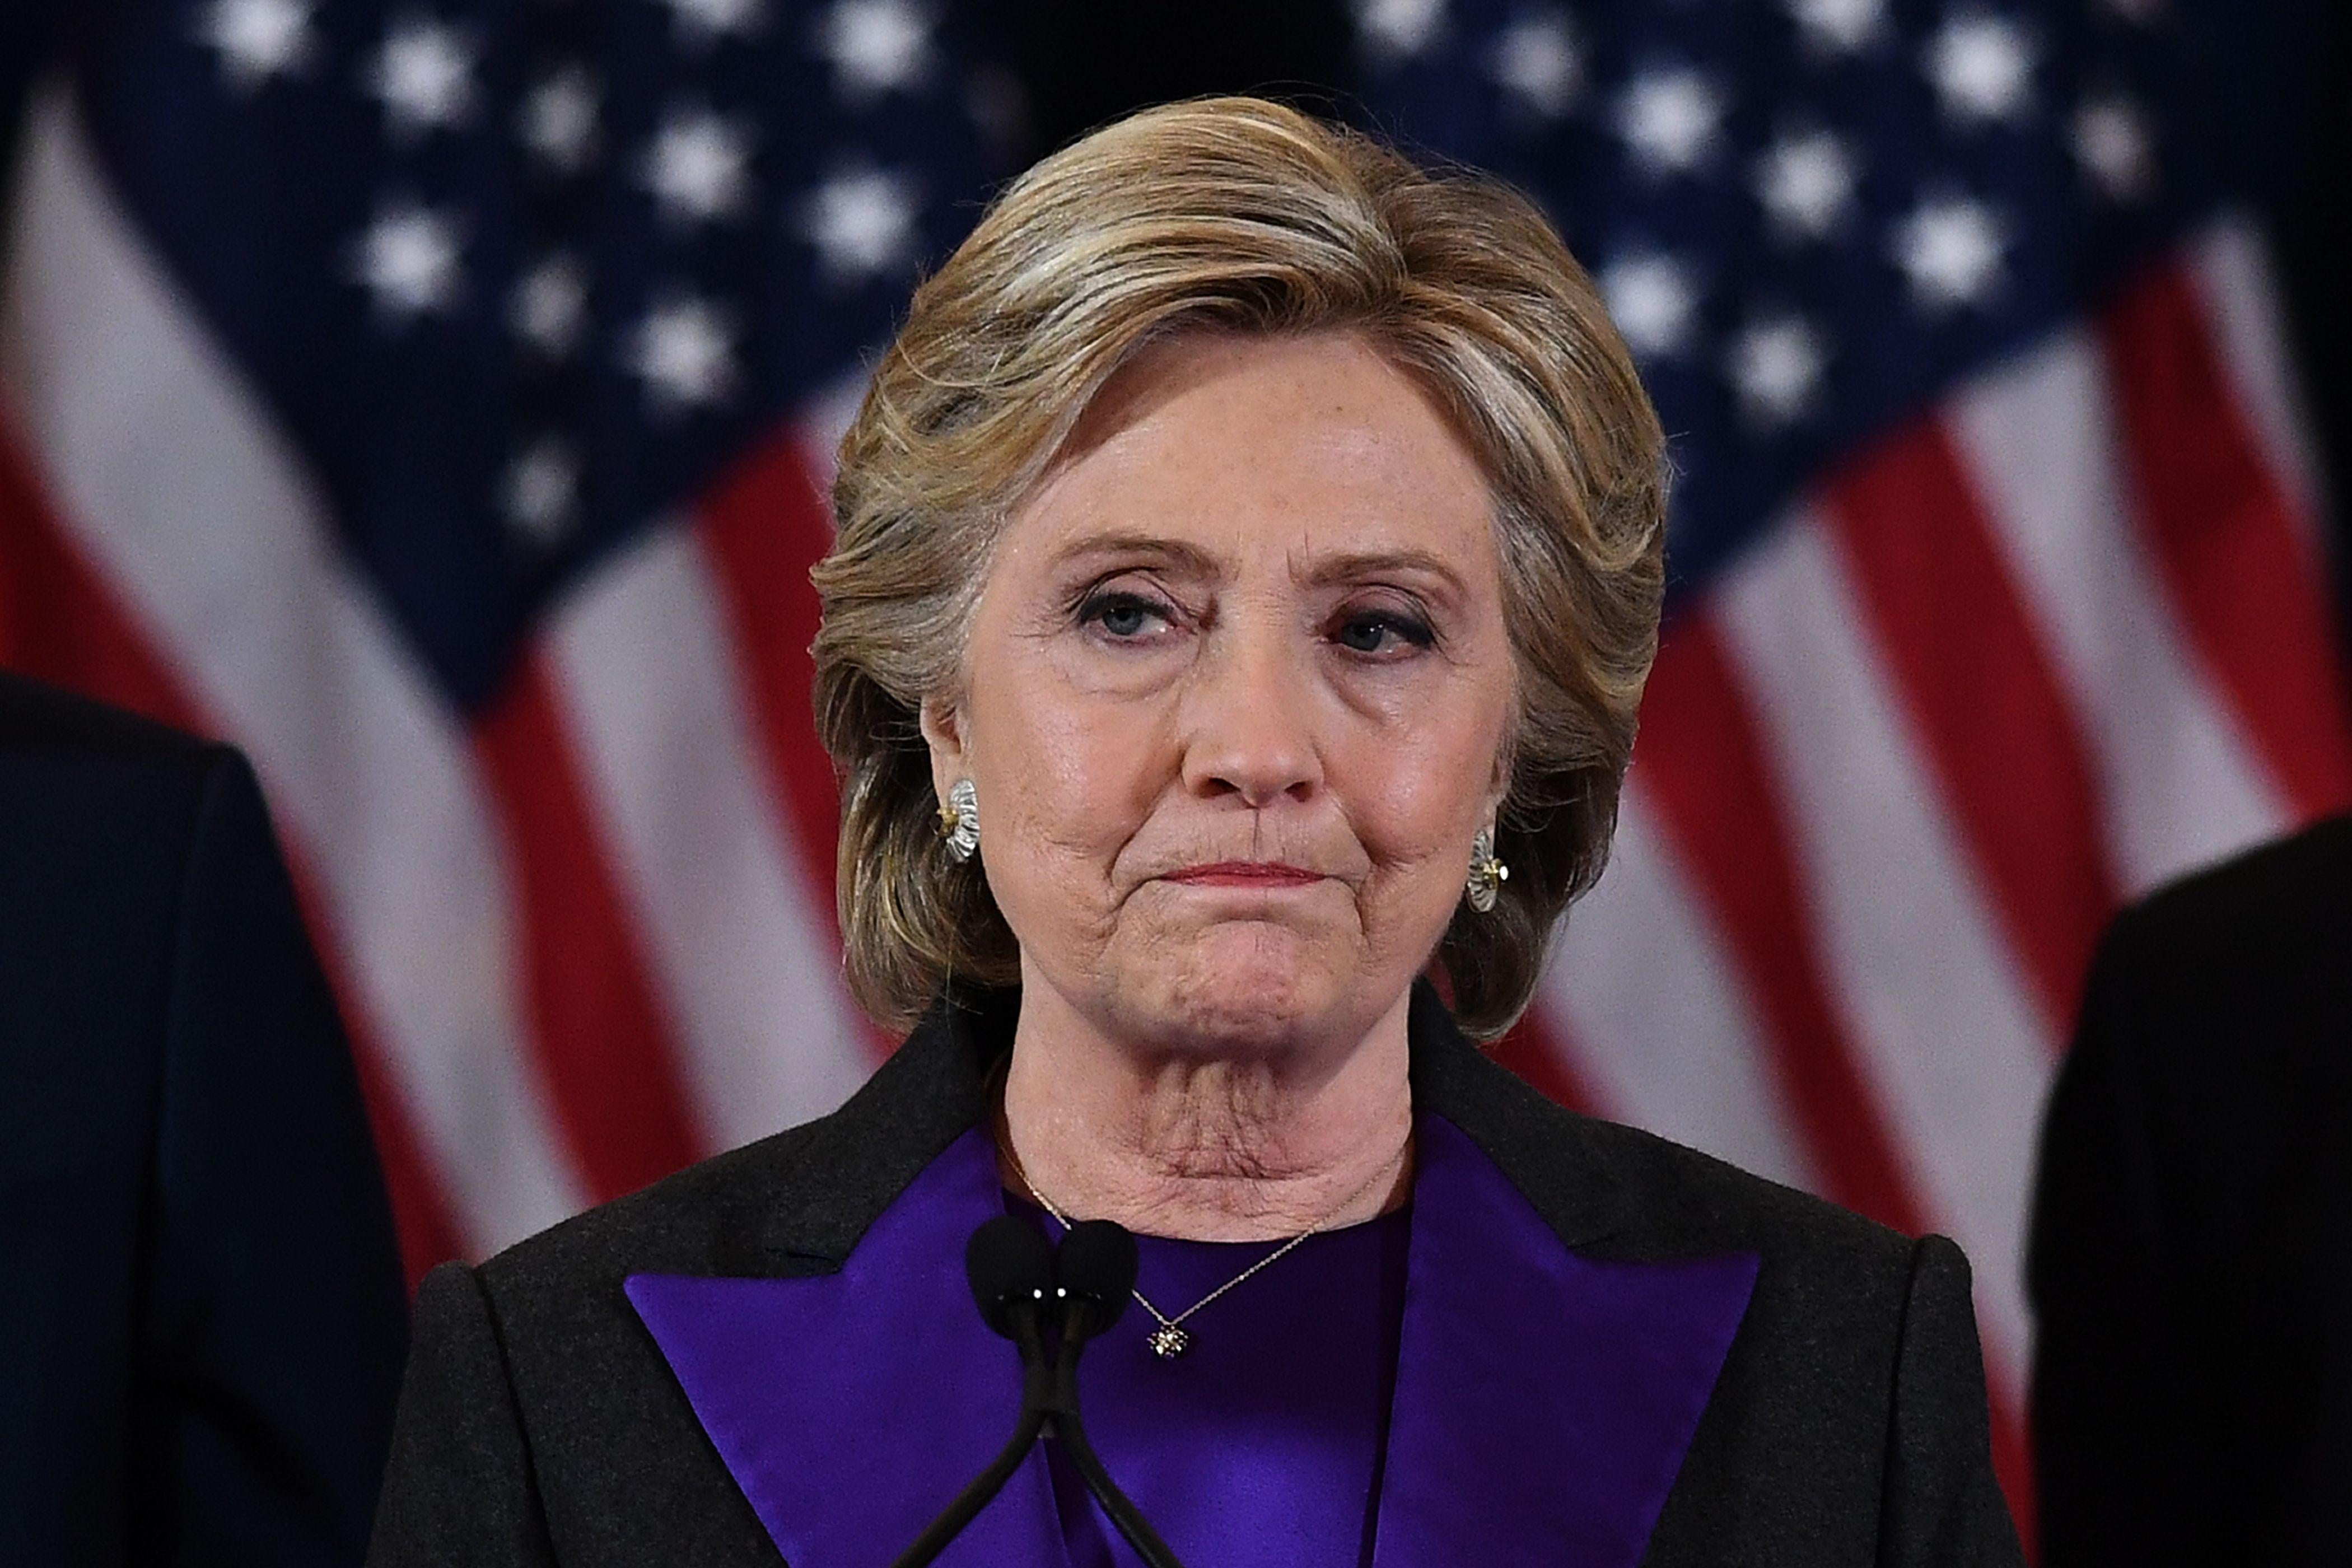 Hillary Clinton makes a concession speech after being defeated by Donald Trump in New York on Nov. 9, 2016.